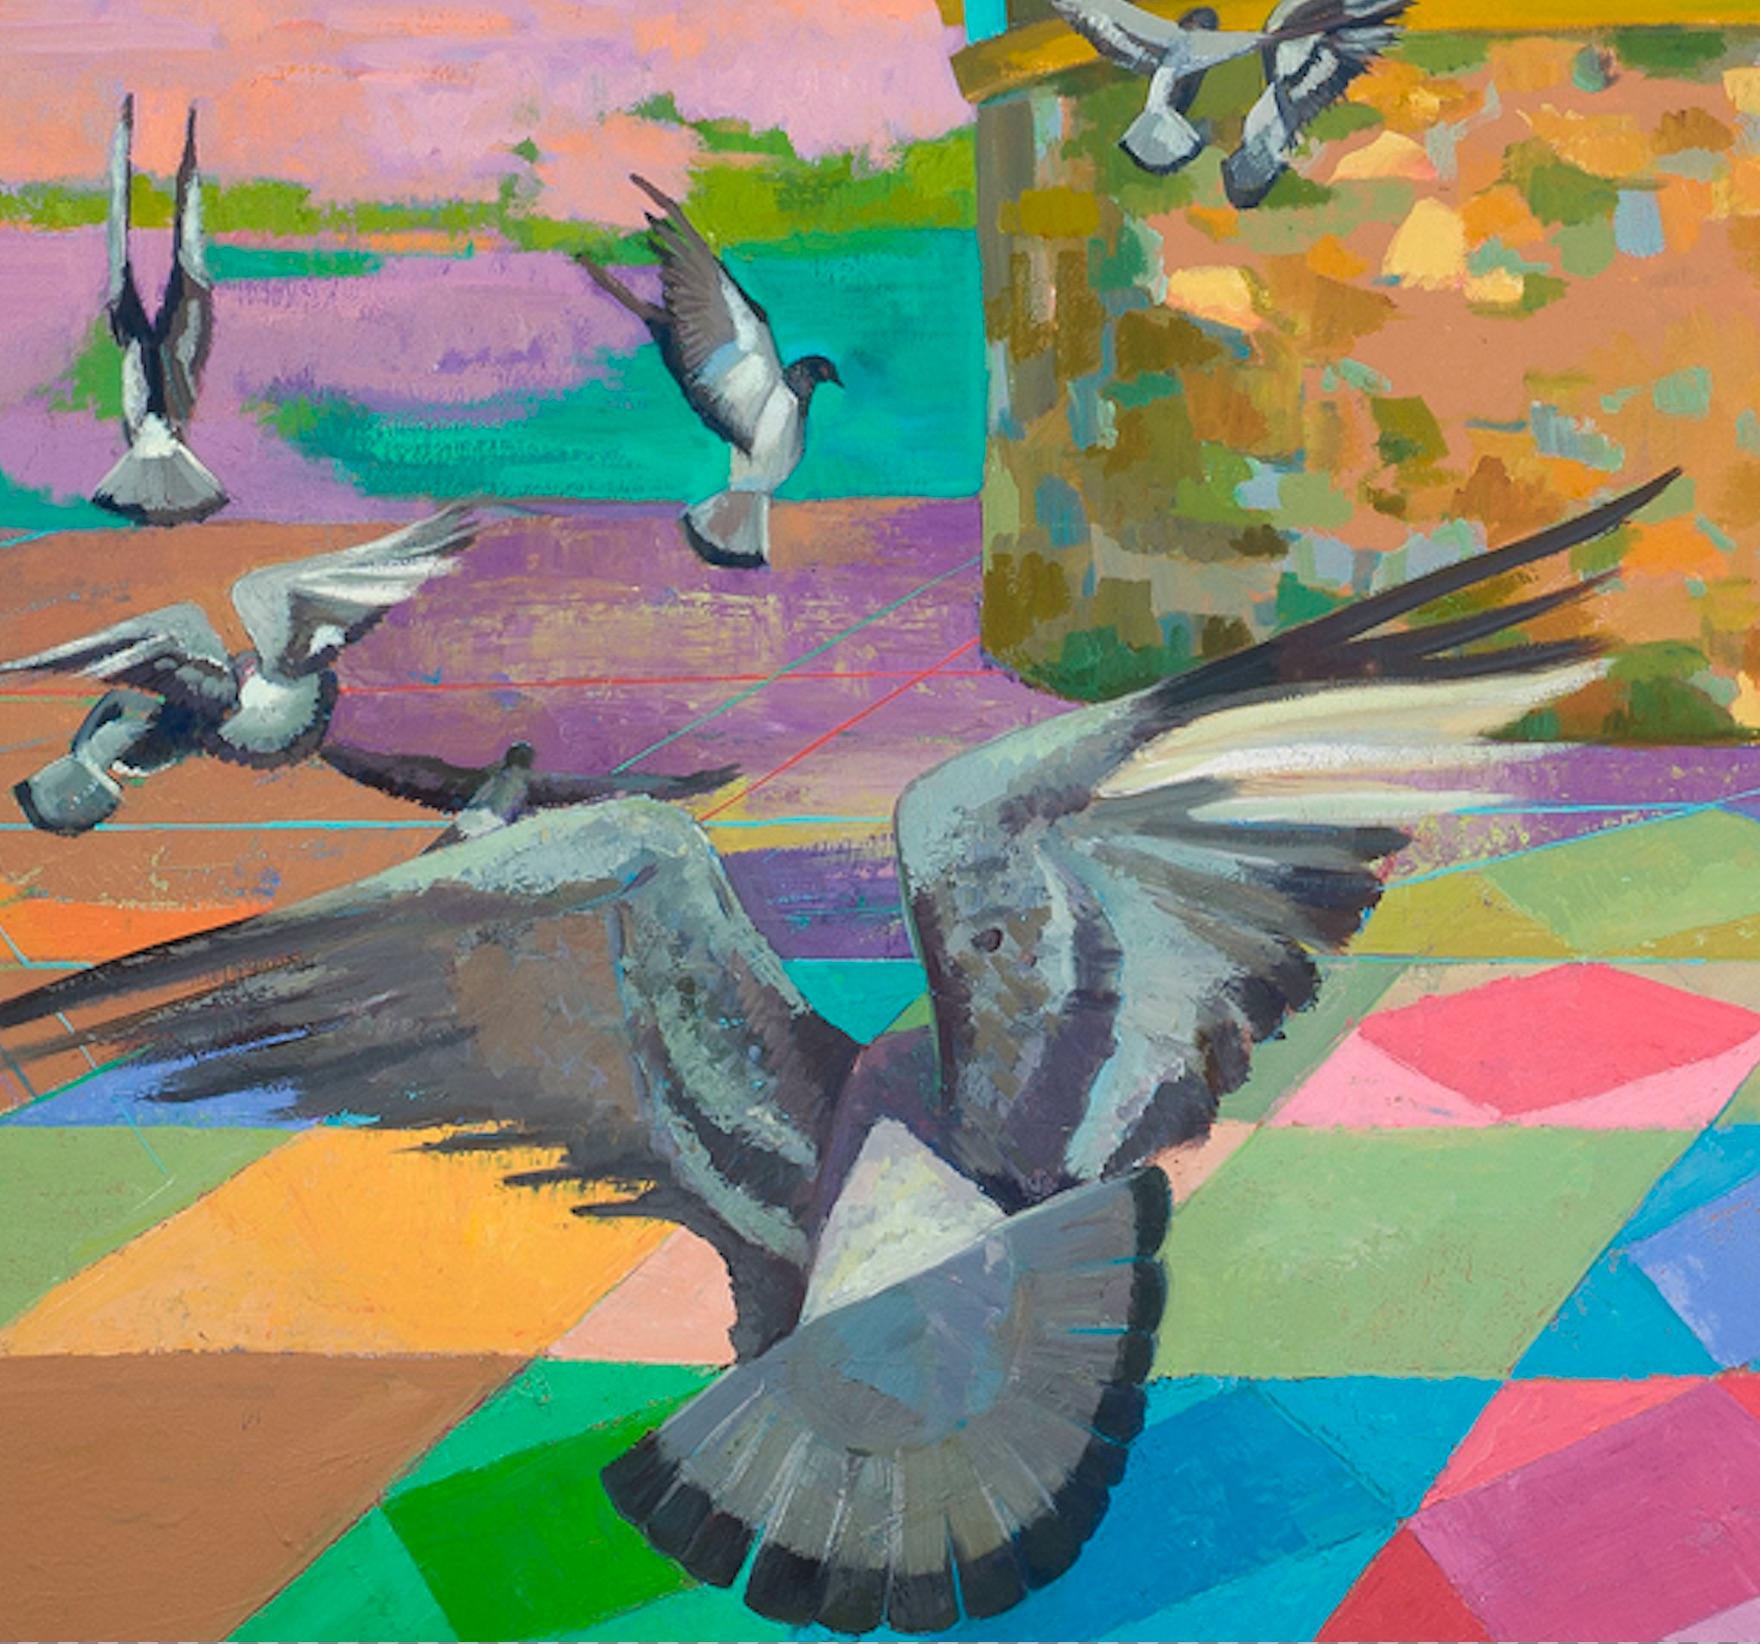 Pigeon Flight: abstract landscape painting w/ birds, architecture & orange sky  - Painting by Deirdre Murphy